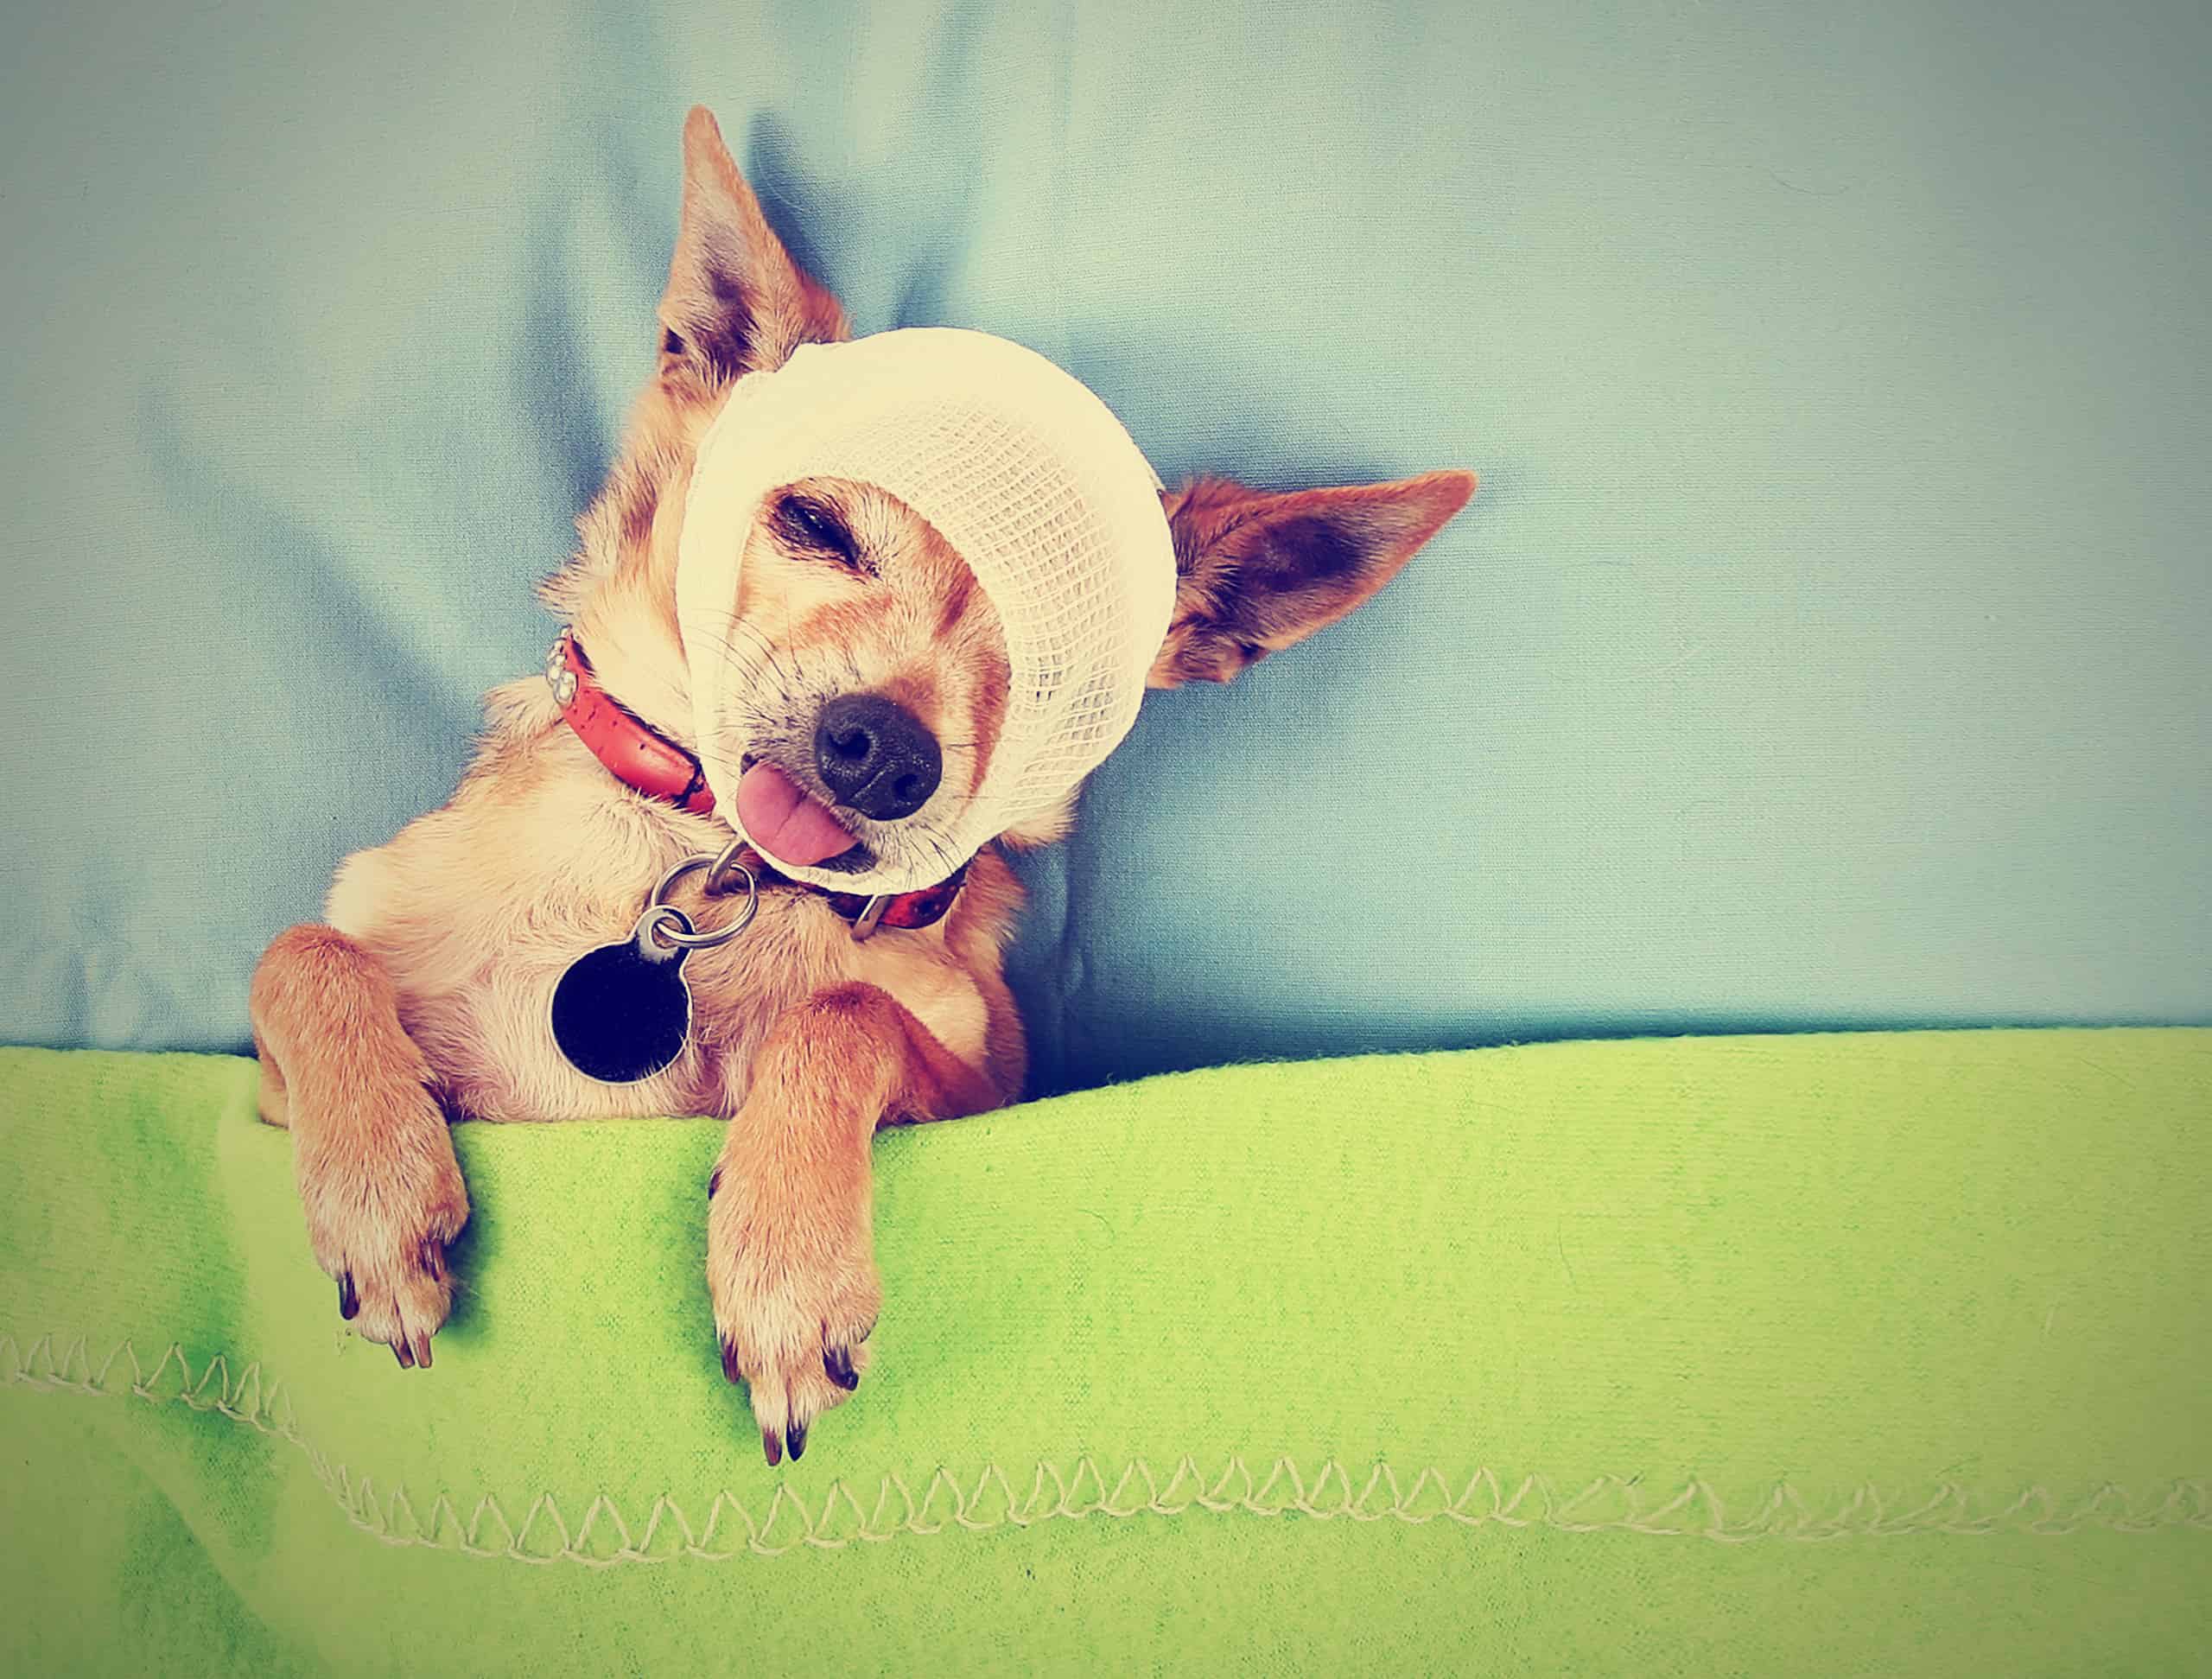 Pet Insurance Cost - dog sleeping on bed with green sheet image